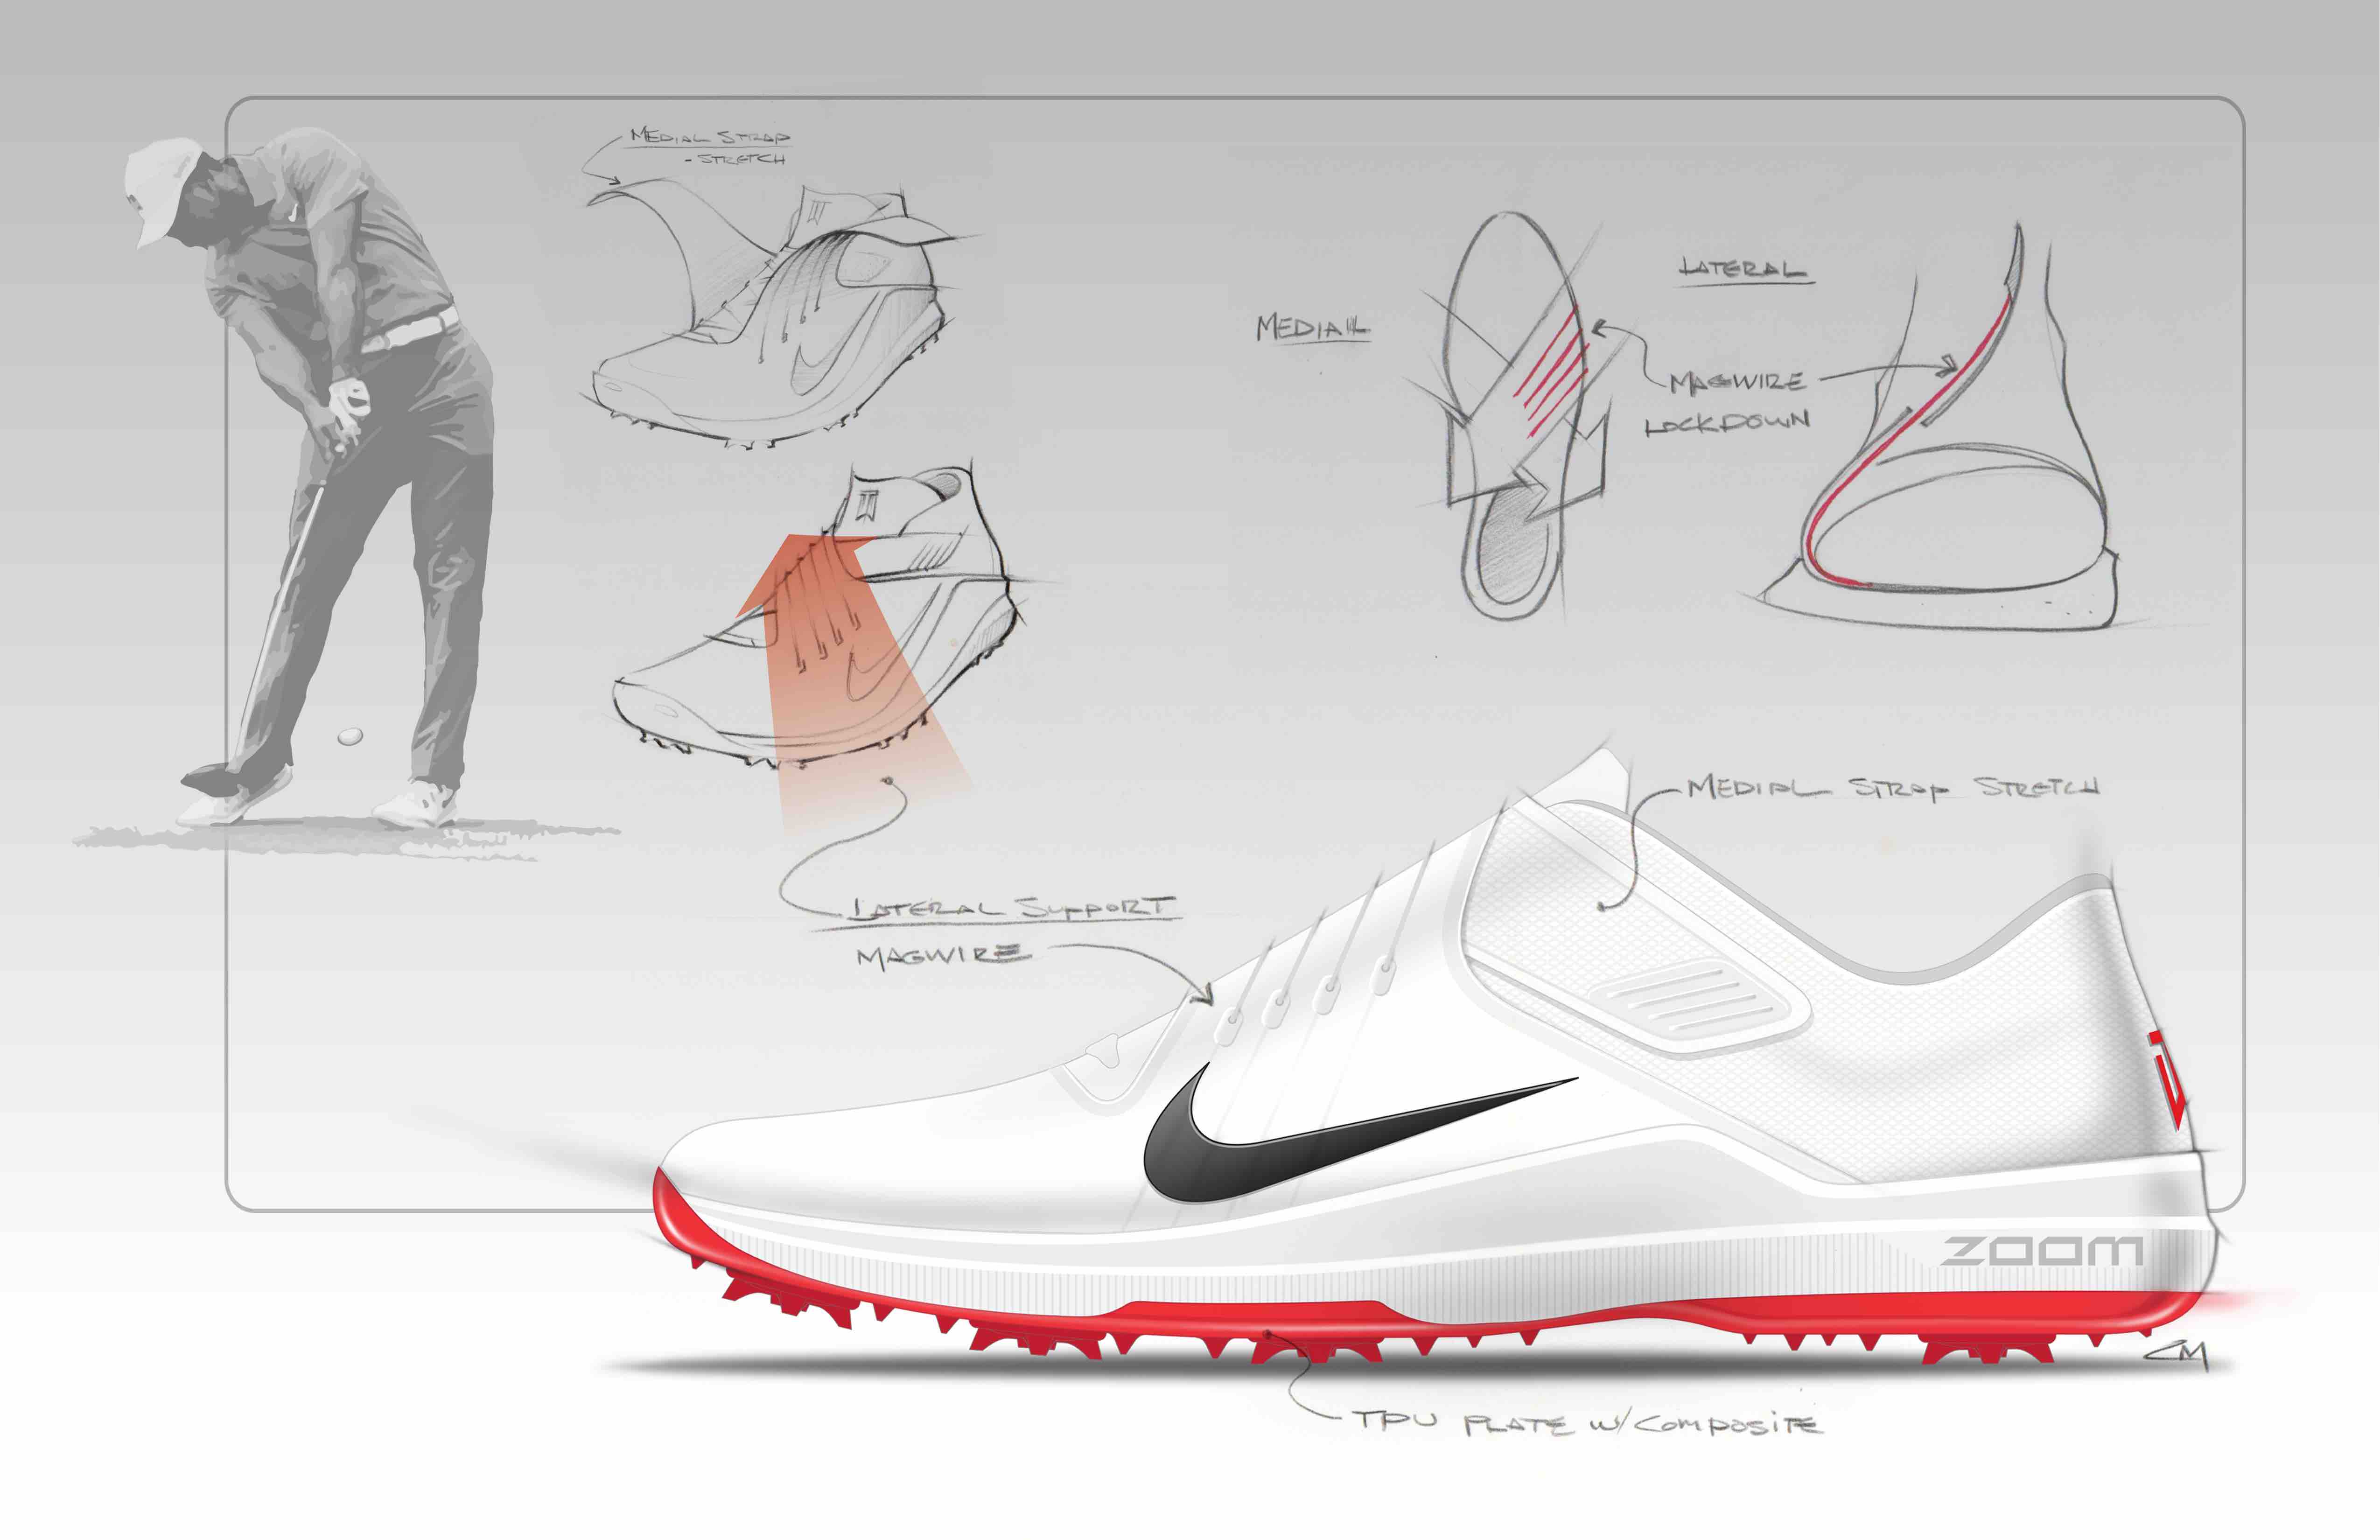 tiger woods 17 shoes